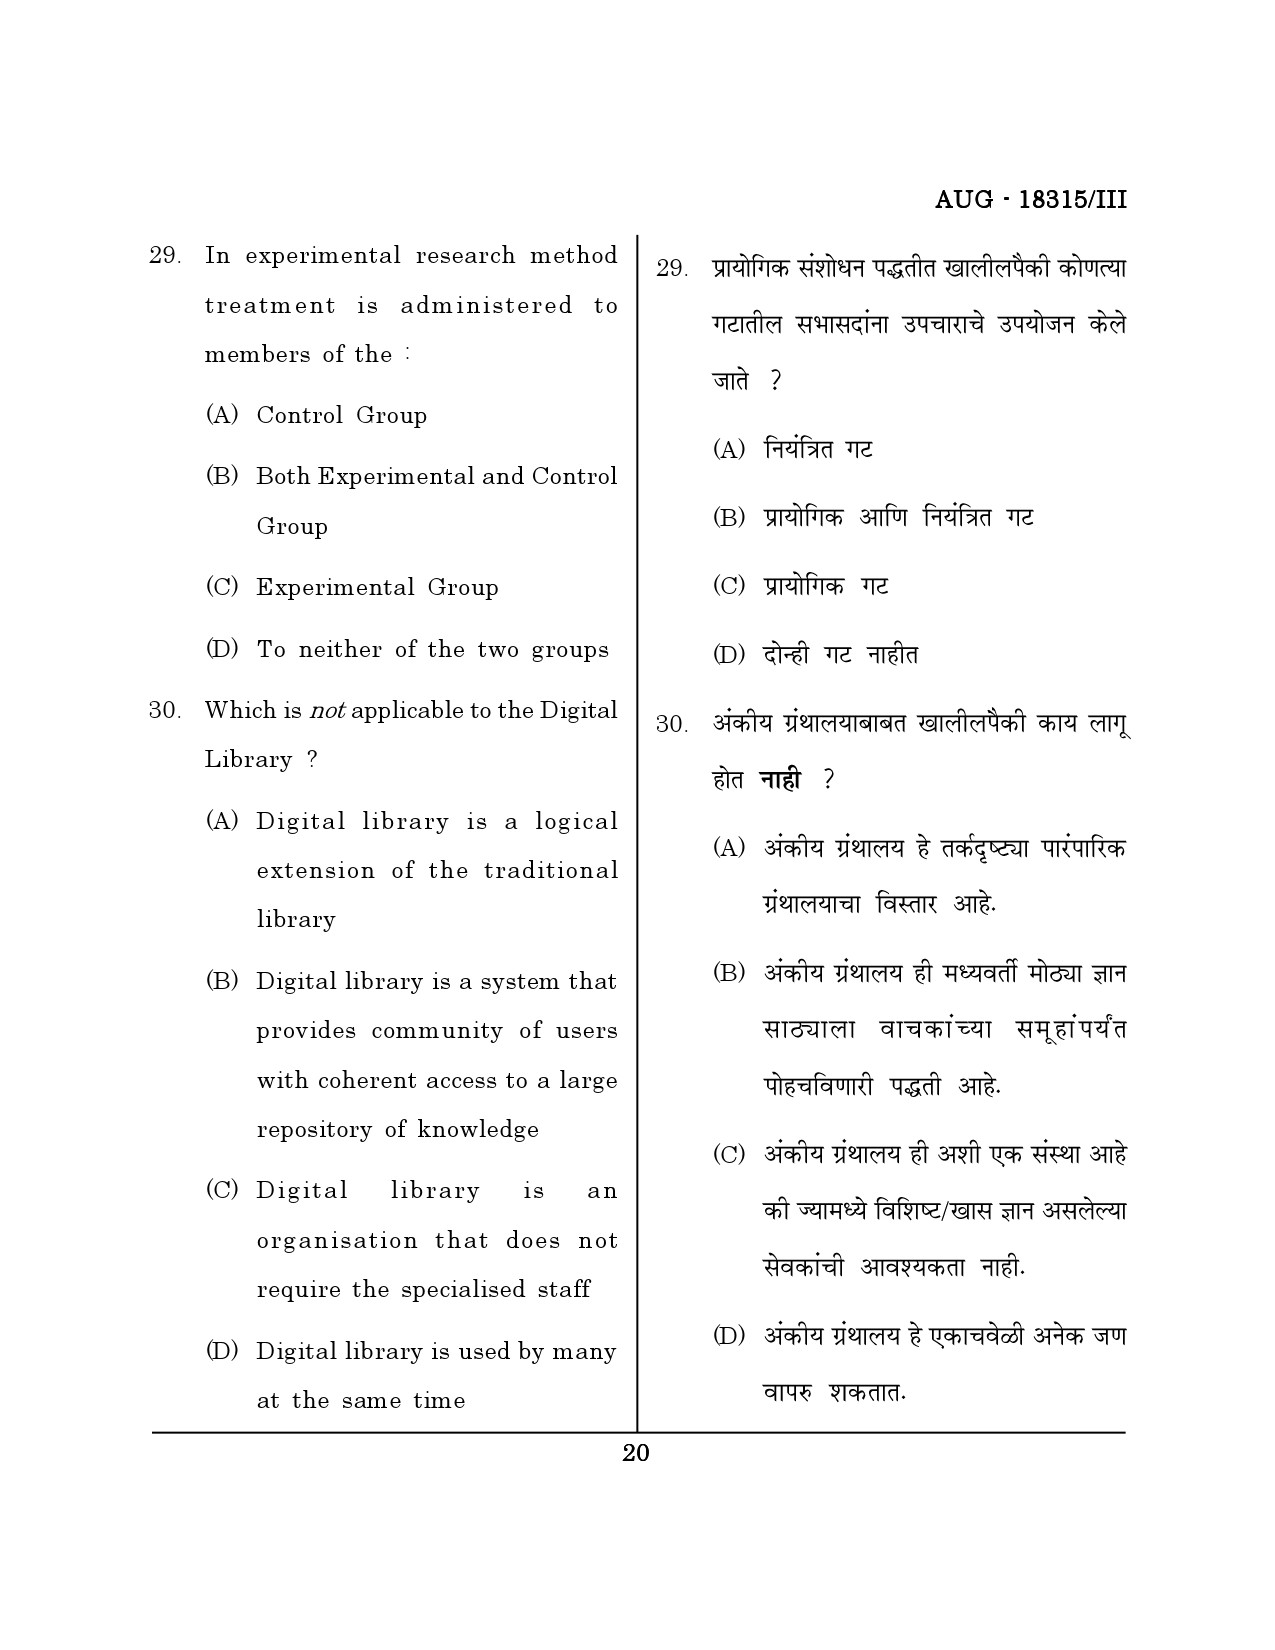 Maharashtra SET Library Information Science Question Paper III August 2015 19